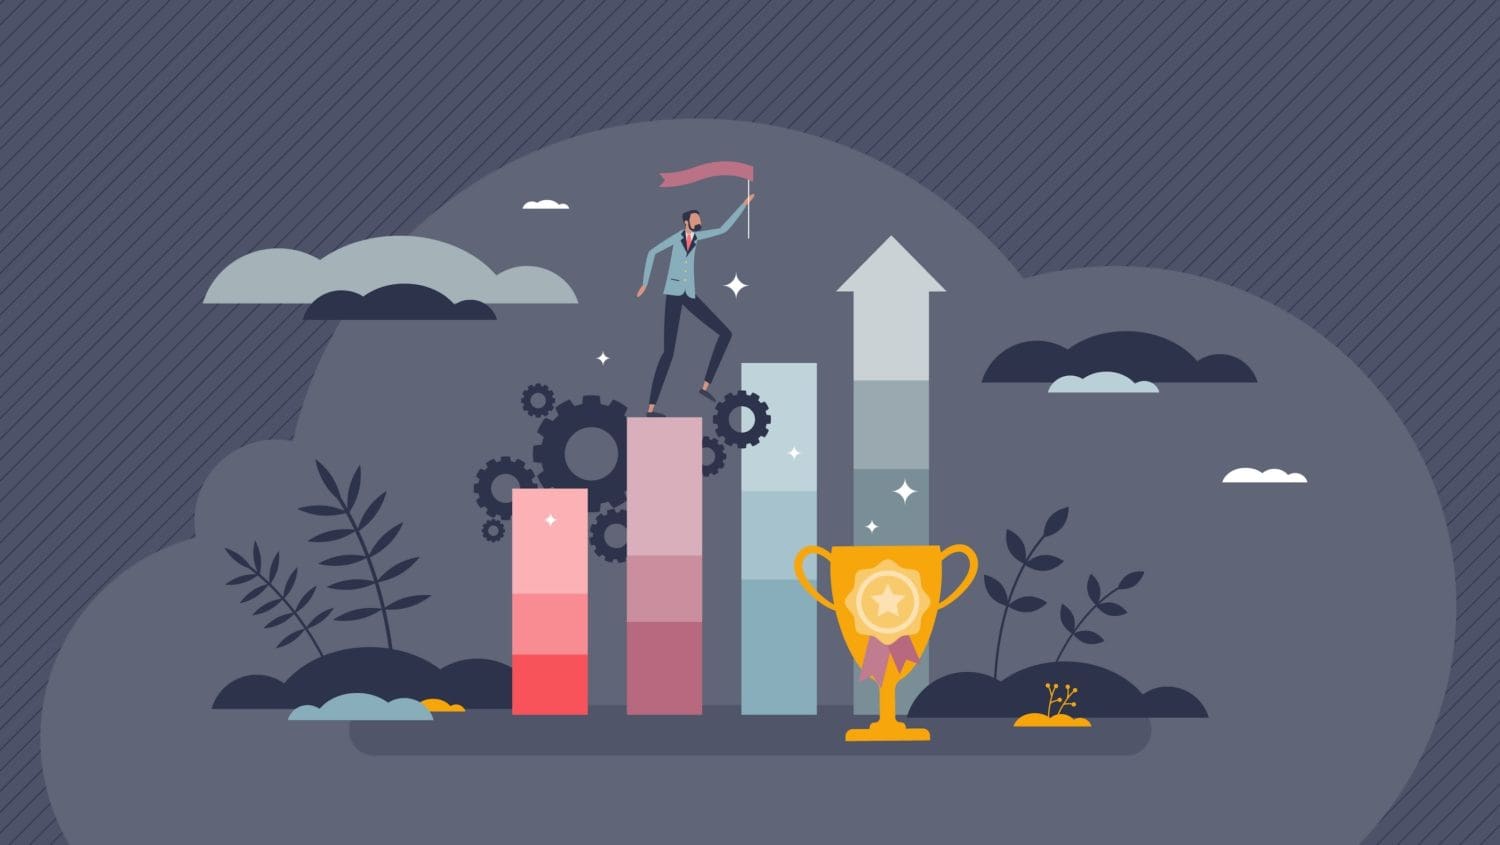 Illustration of a businessman climbing a bar graph with gear mechanisms, leading to a trophy, signifying business success and achievement.